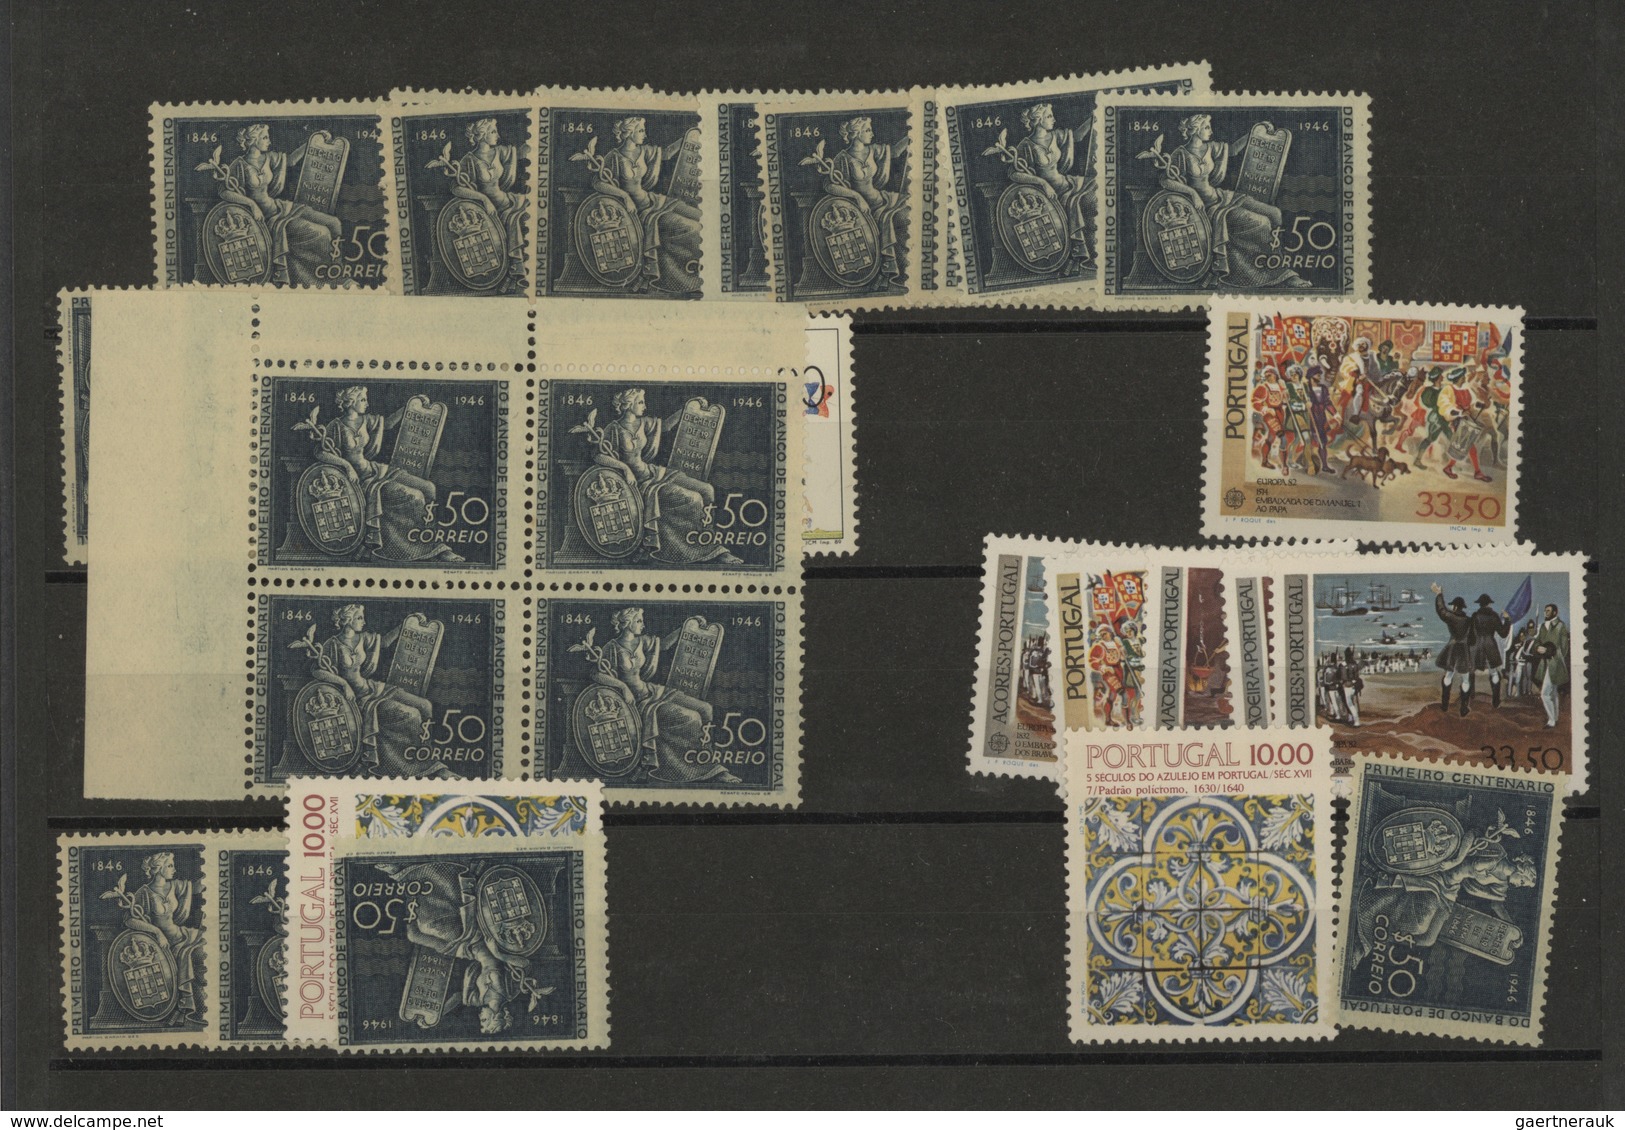 Portugal: 1928/1980 (ca.), duplicates on stockcards with many complete sets incl. better issues, pho